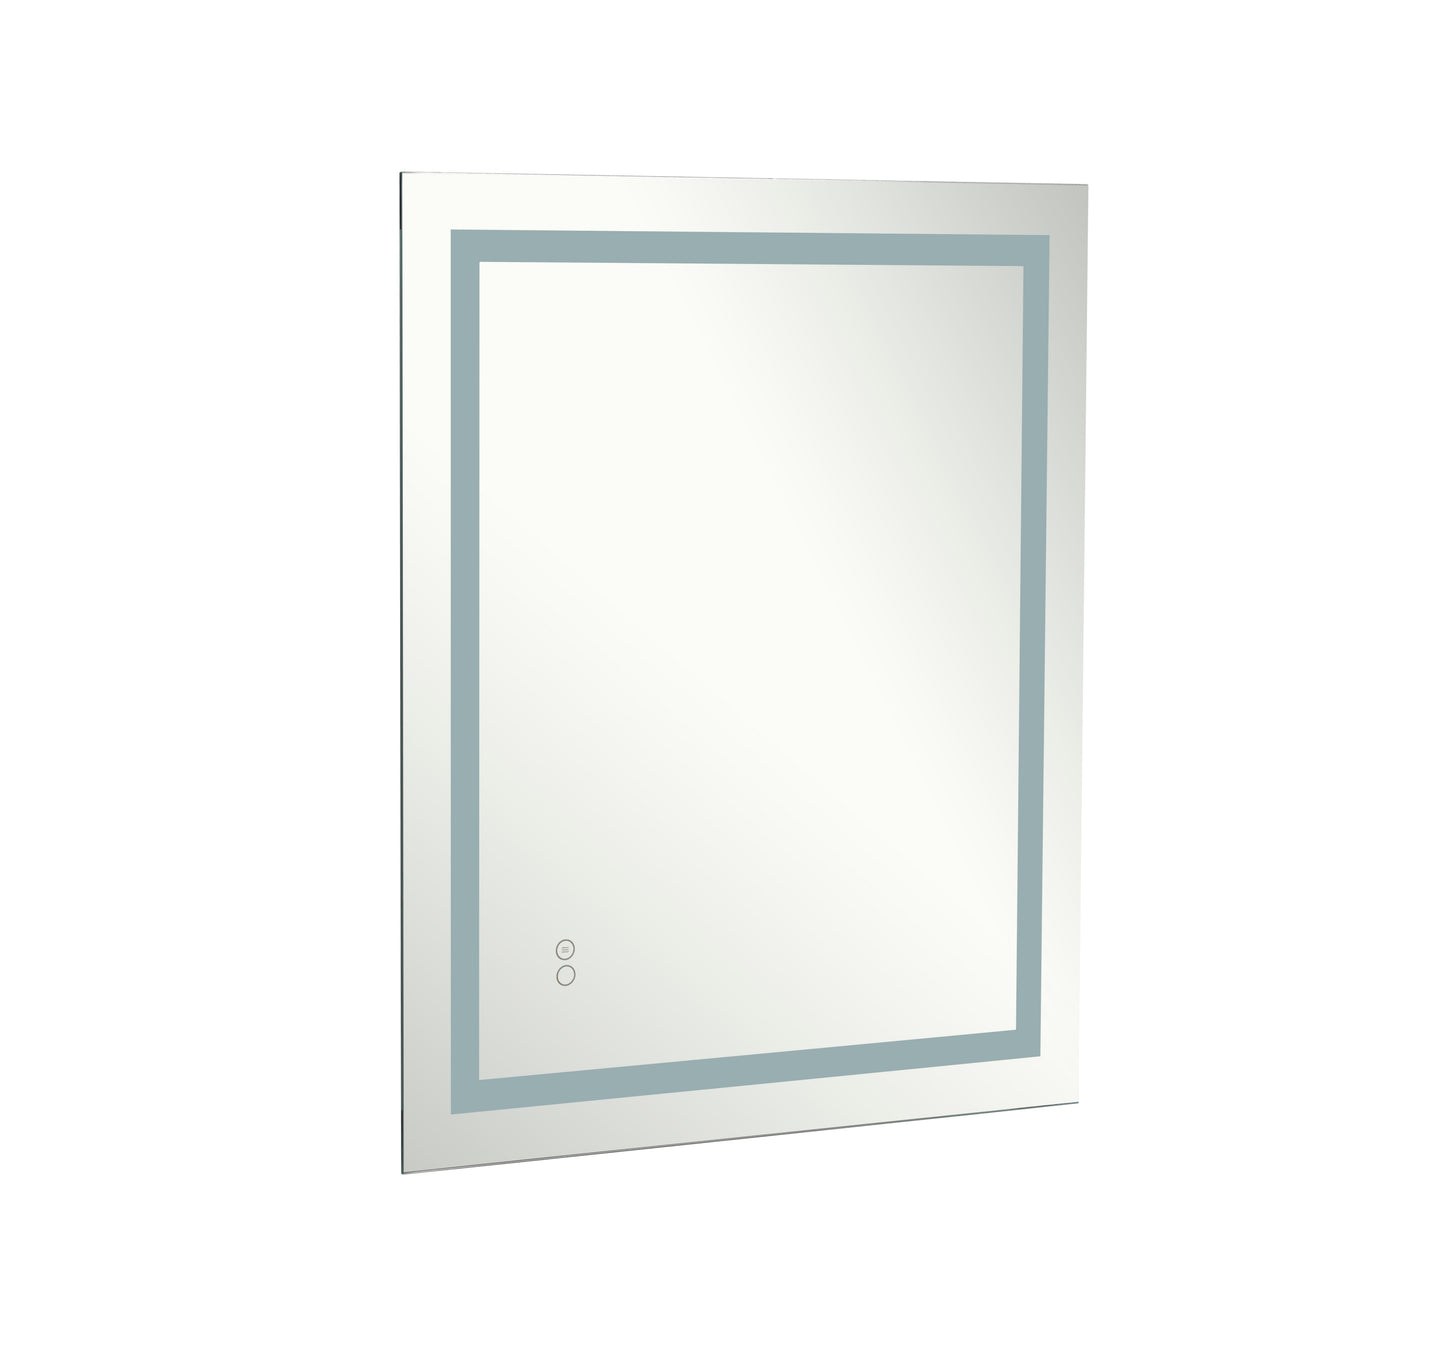 Led Mirror for Bathroom with Lights,Dimmable,Anti-Fog,Lighted Bathroom Mirror with Smart Touch Button,Memory Function(Horizontal/Vertical)